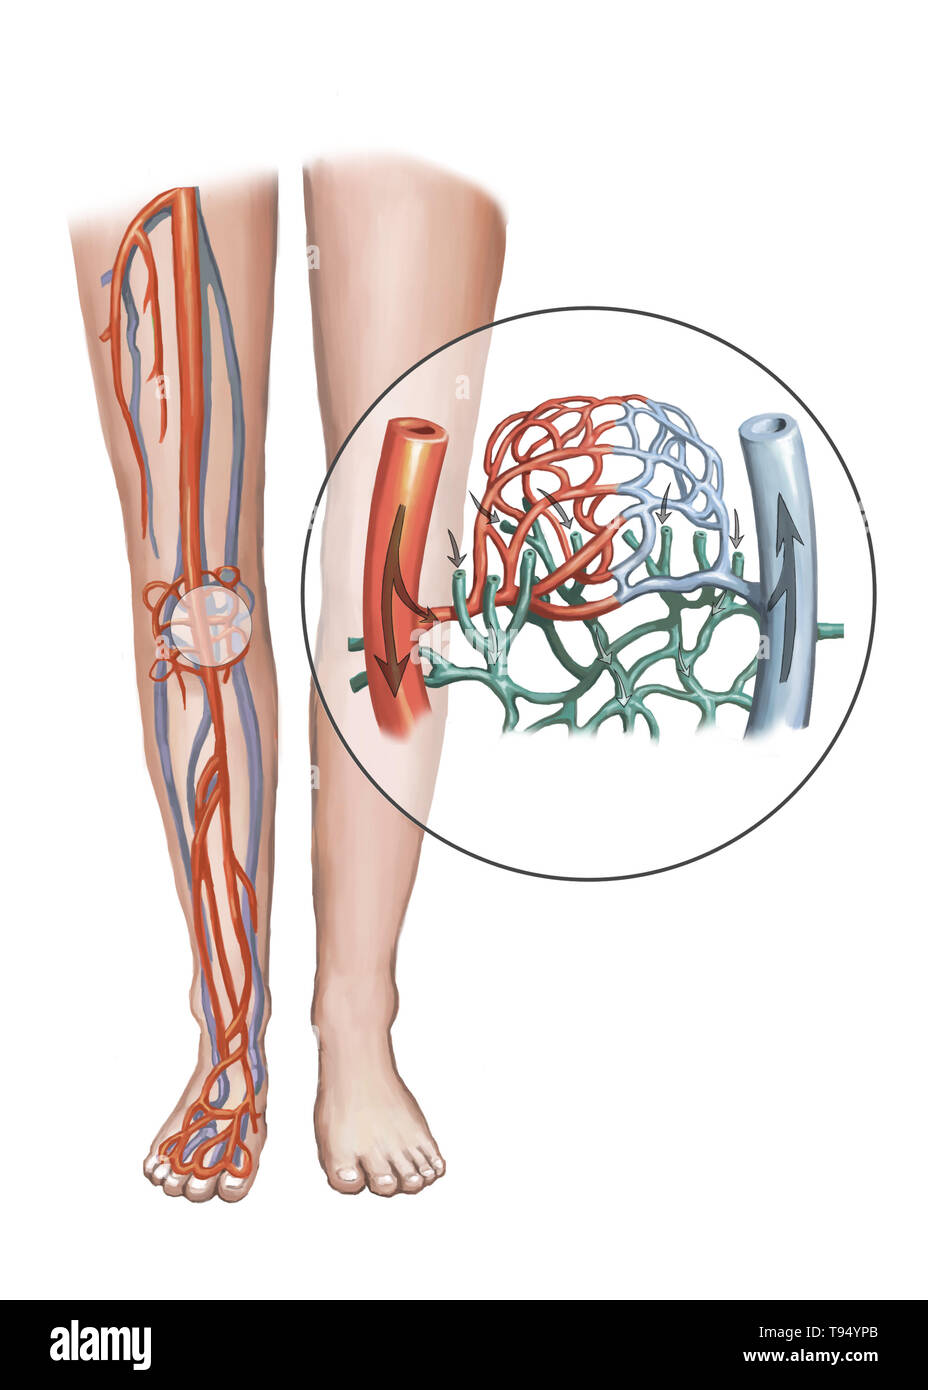 Illustration of blood vessels, artery and capillary networks in leg. Stock Photo